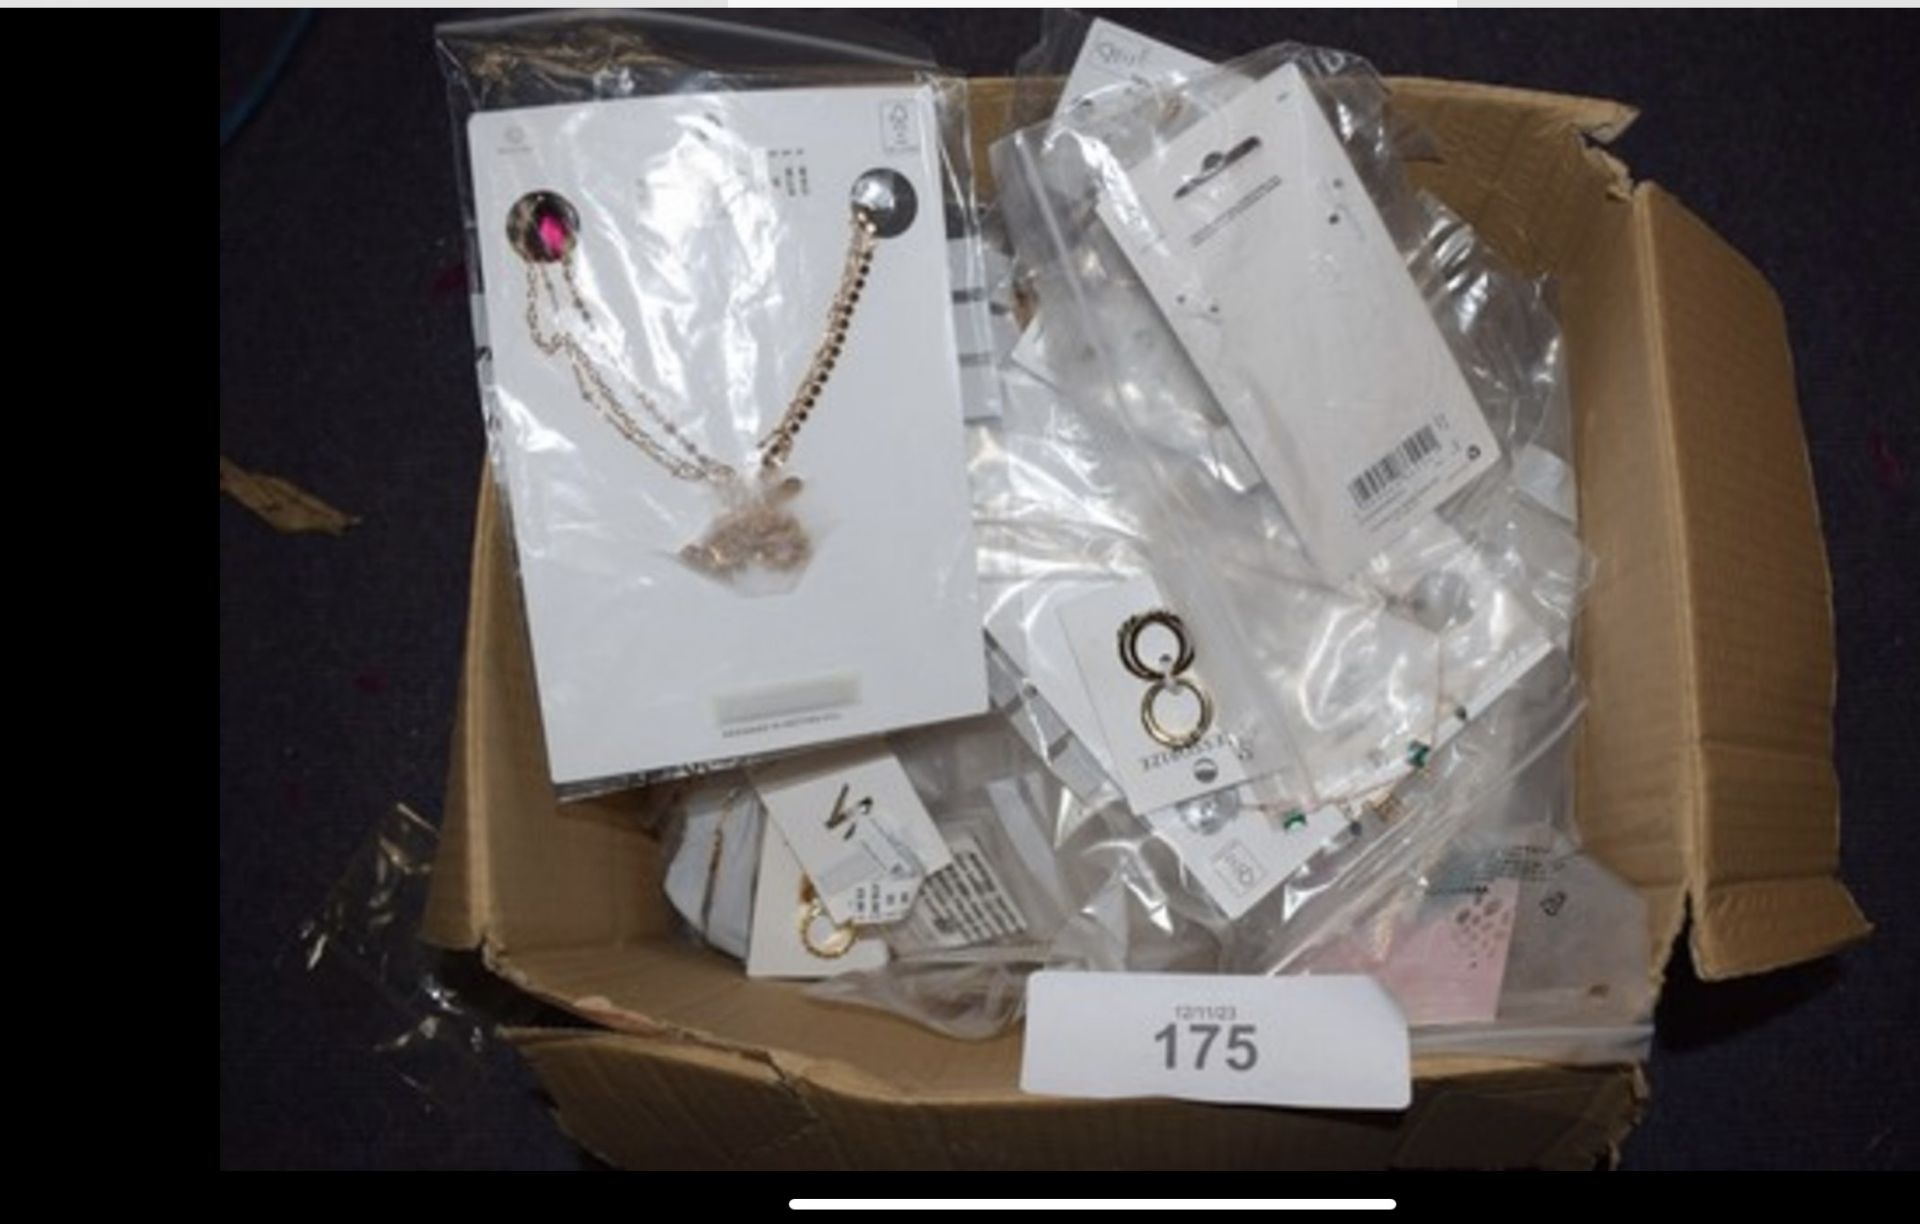 Approximately 160 x Pieces of Accesorize Jewellery - New In Pack